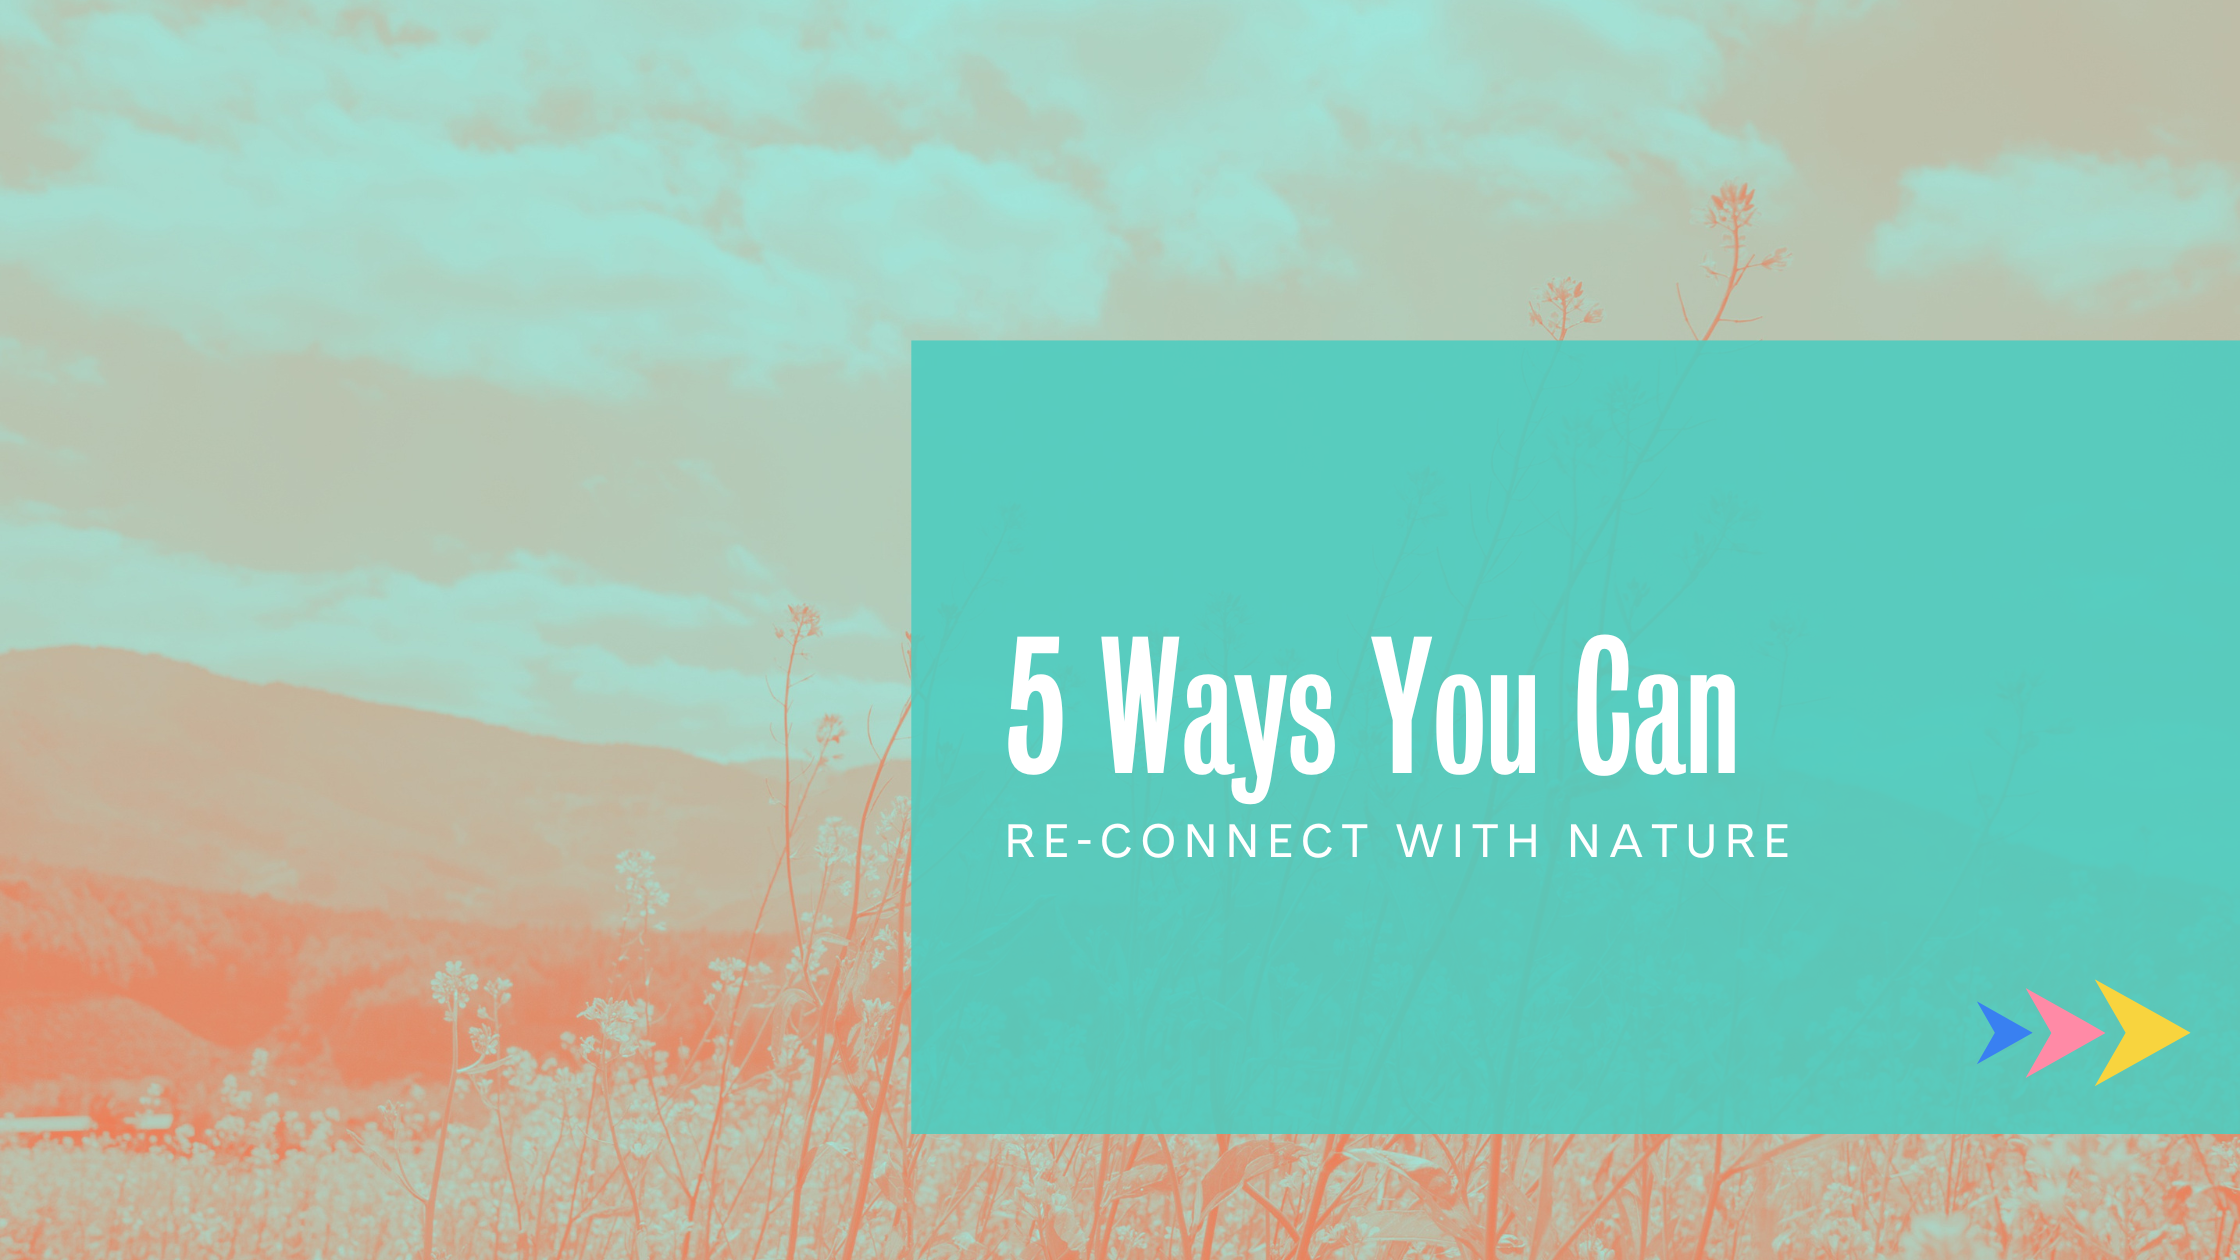 5 Ways You Can Re-Connect with Nature – Mental Health Awareness Week 2021